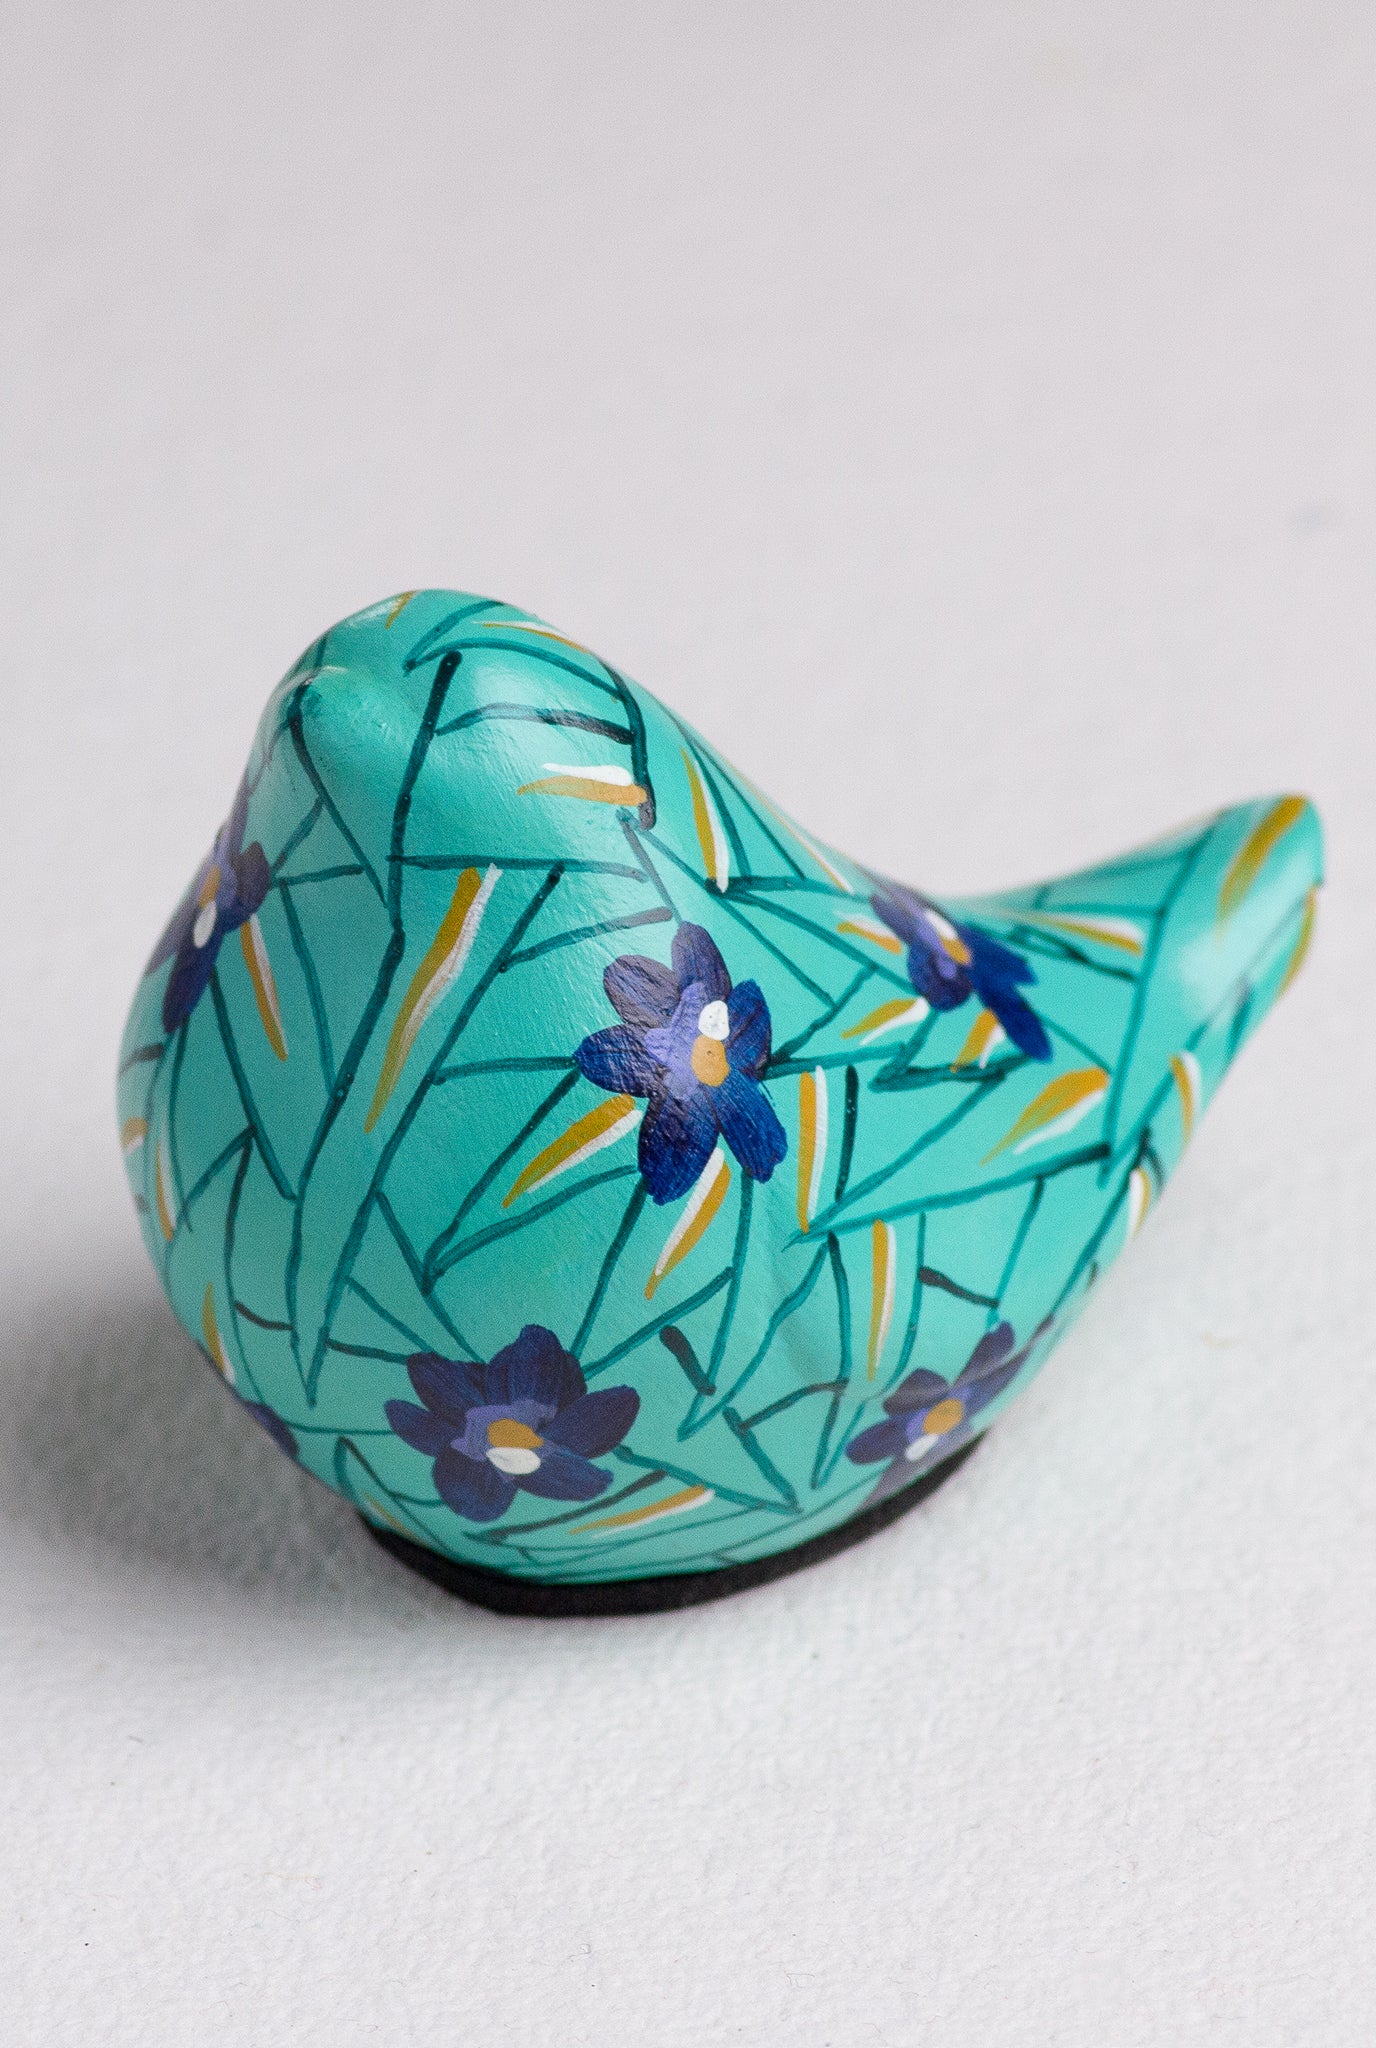 decor-handcrafted-ceramic-hand painted-paperweight